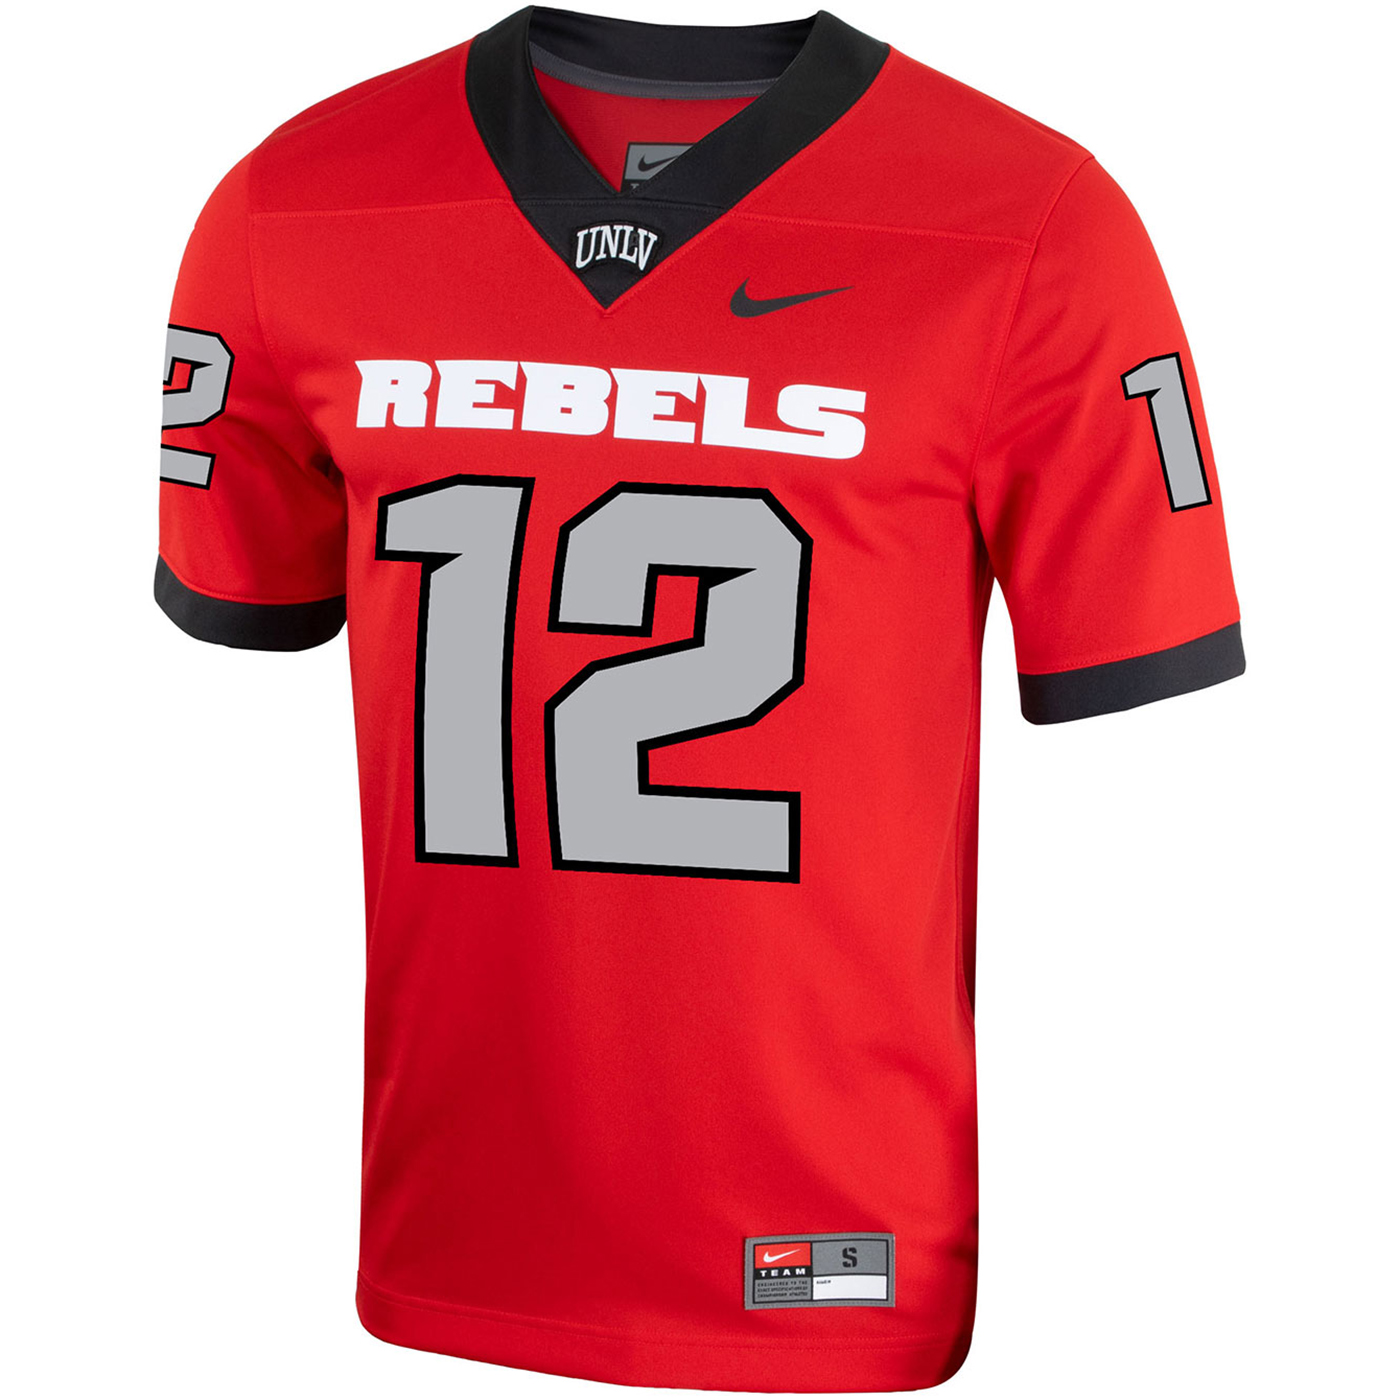 Product Detail  NIKE UNLV REPLICA JERSEY - Red - S